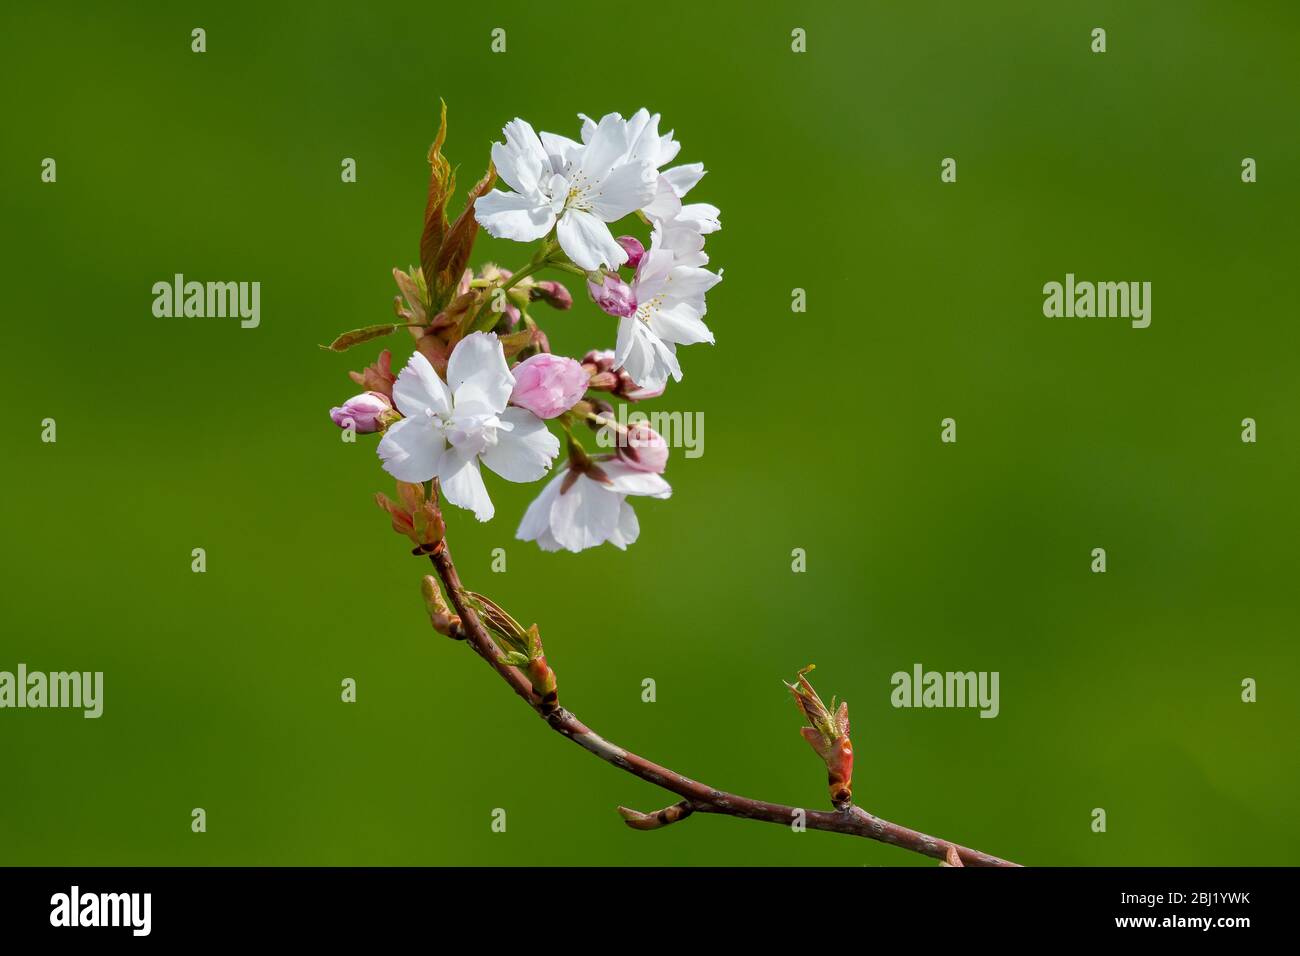 Apple blossom close-up. Shallow depth of field green backdrop Stock Photo